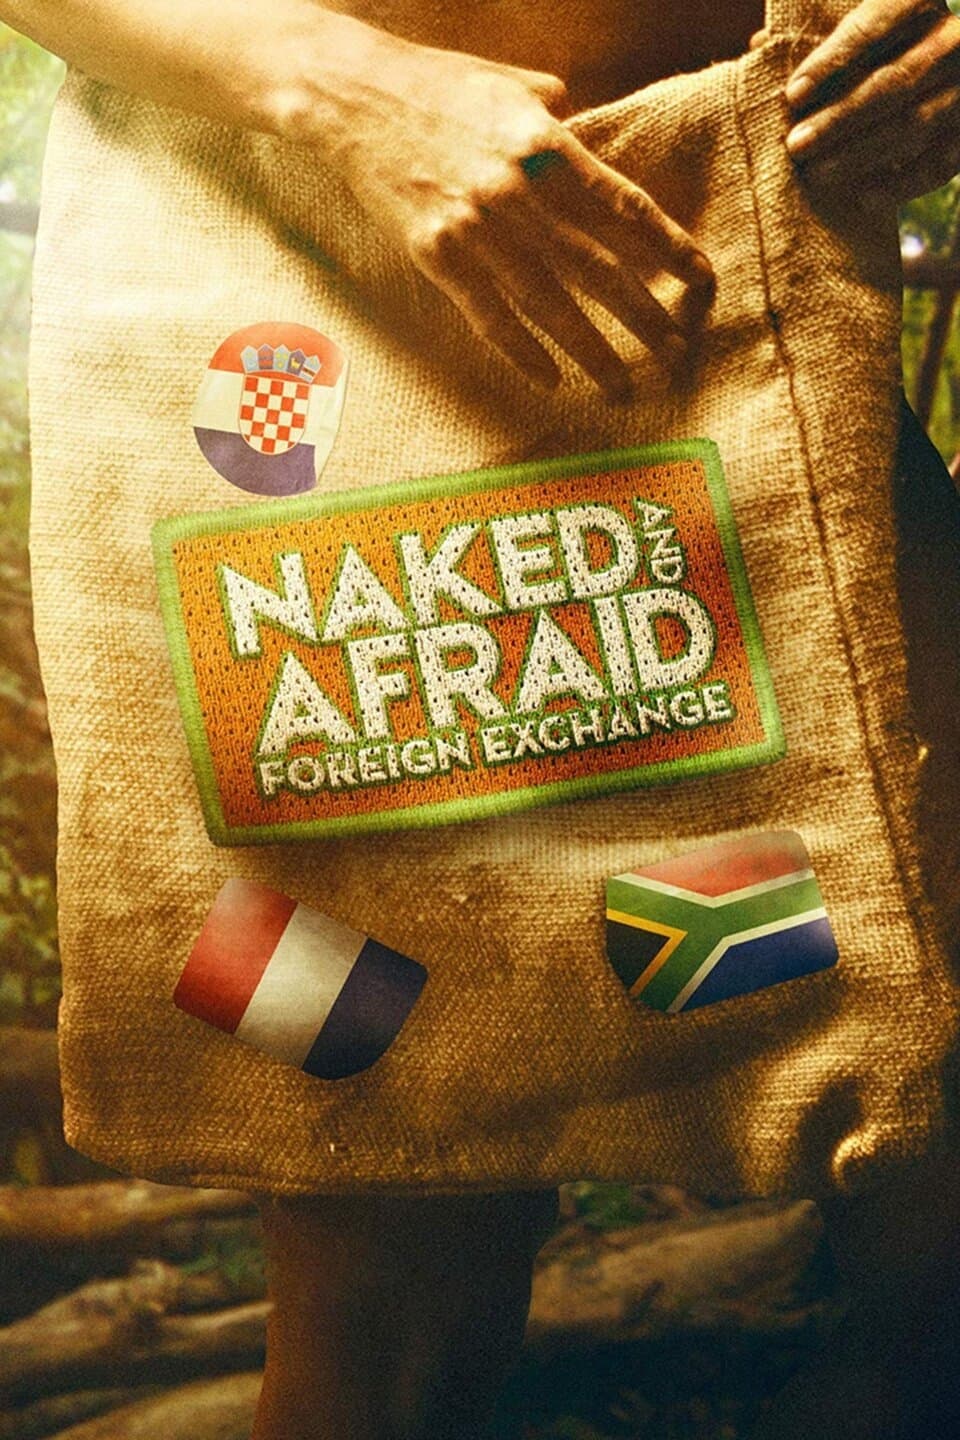 Naked and Afraid: Foreign Exchange